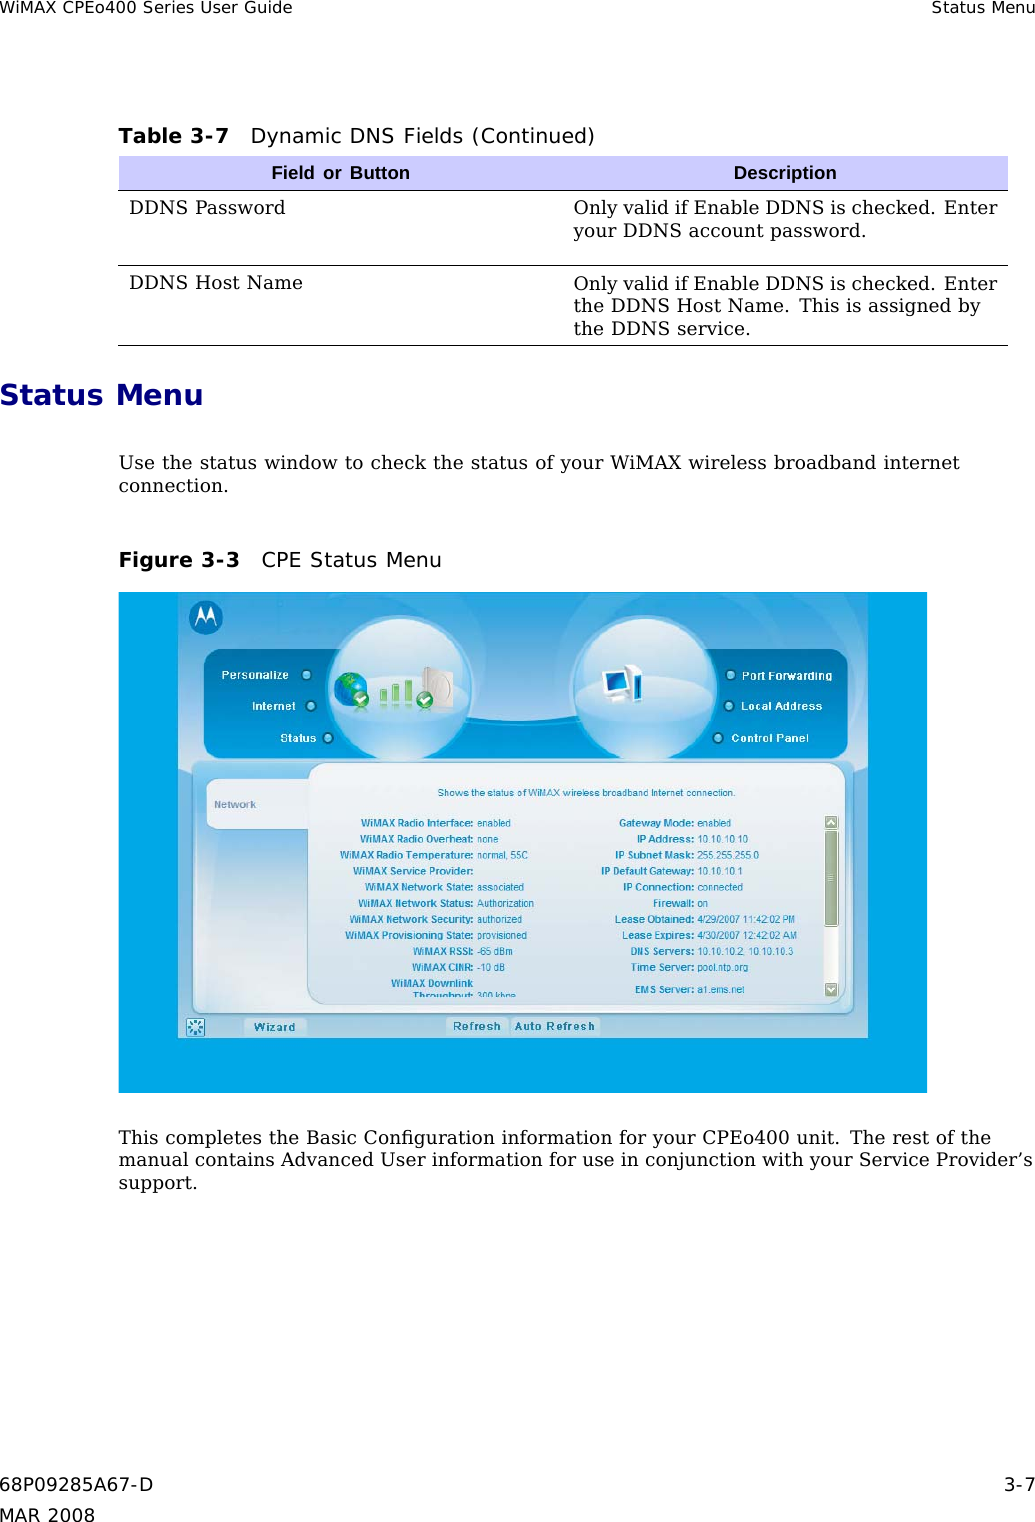 WiMAX CPEo400 Series User Guide Status MenuTable 3-7 Dynamic DNS Fields (Continued)Field or Button DescriptionDDNS Password Only valid if Enable DDNS is checked. Enteryour DDNS account password.DDNS Host Name Only valid if Enable DDNS is checked. Enterthe DDNS Host Name. This is assigned bythe DDNS service.Status MenuUse the status window to check the status of your WiMAX wireless broadband internetconnection.Figure 3-3 CPE Status MenuThis completes the Basic Conﬁguration information for your CPEo400 unit. The rest of themanual contains Advanced User information for use in conjunction with your Service Provider’ssupport.68P09285A67-D 3-7MAR 2008